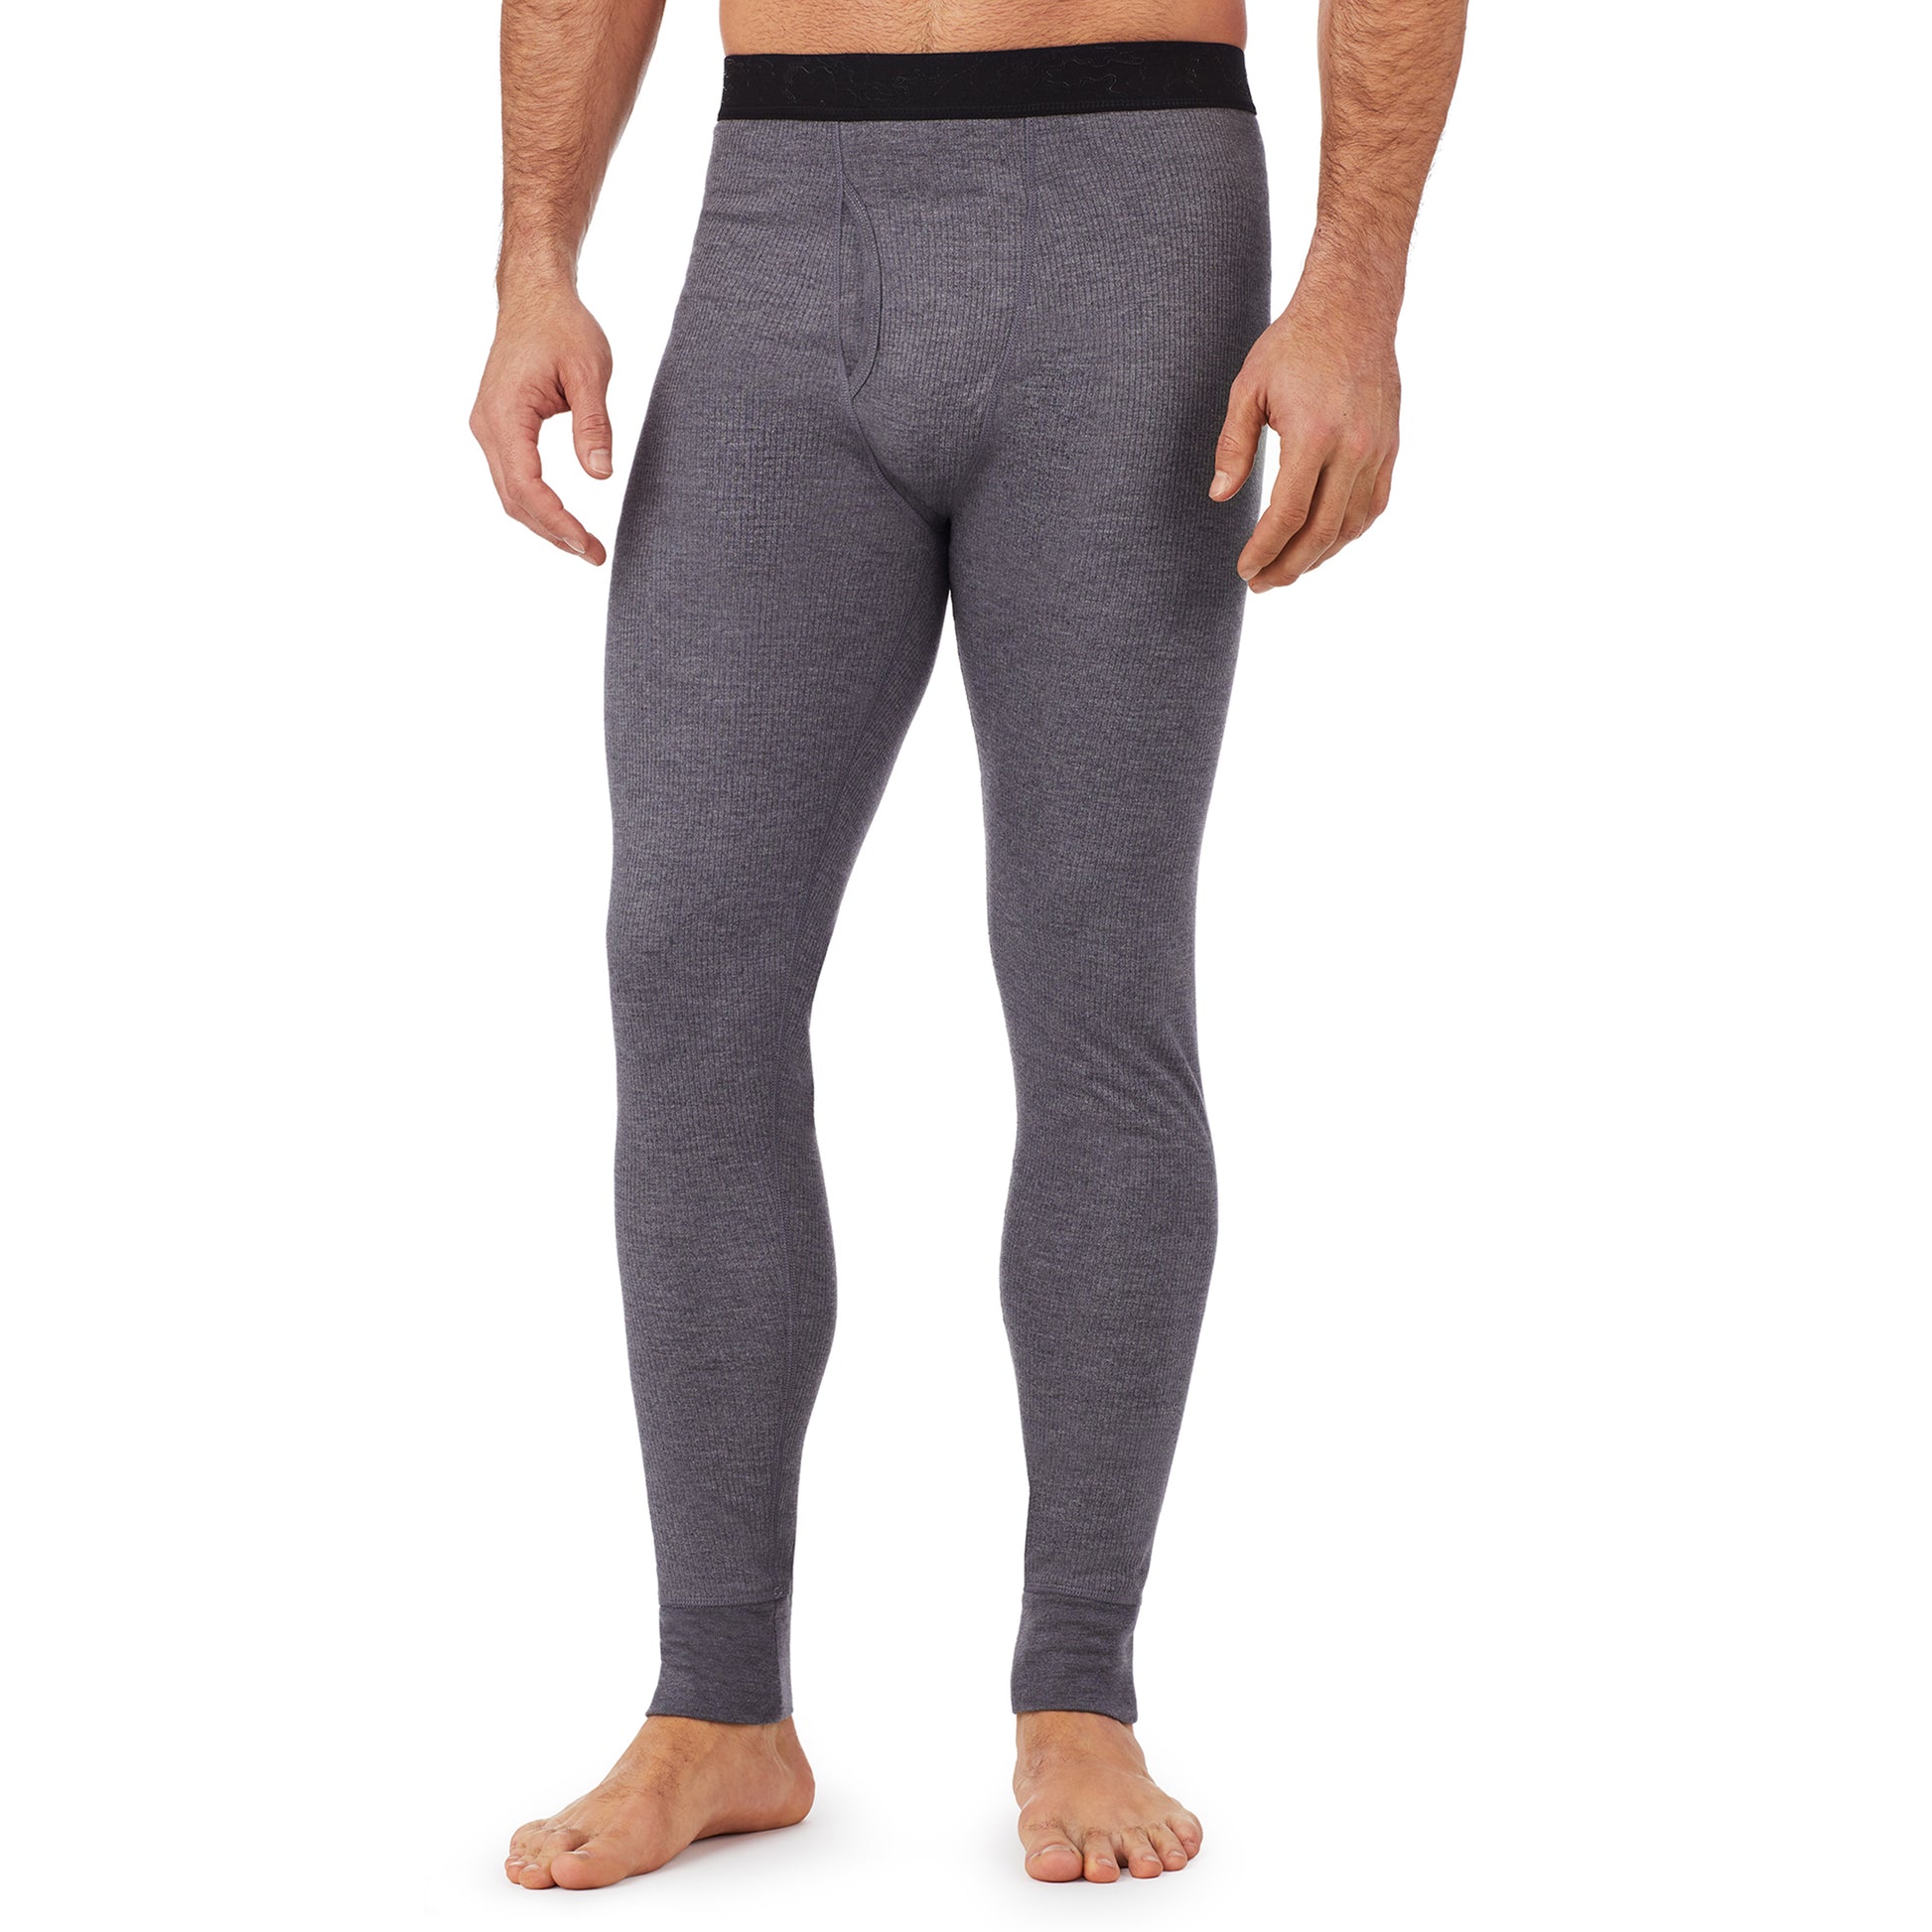 Charcoal Heather; Model is wearing size M. He is 6'1", Waist 31", Inseam 33".@lower body of A man wearing grey pant